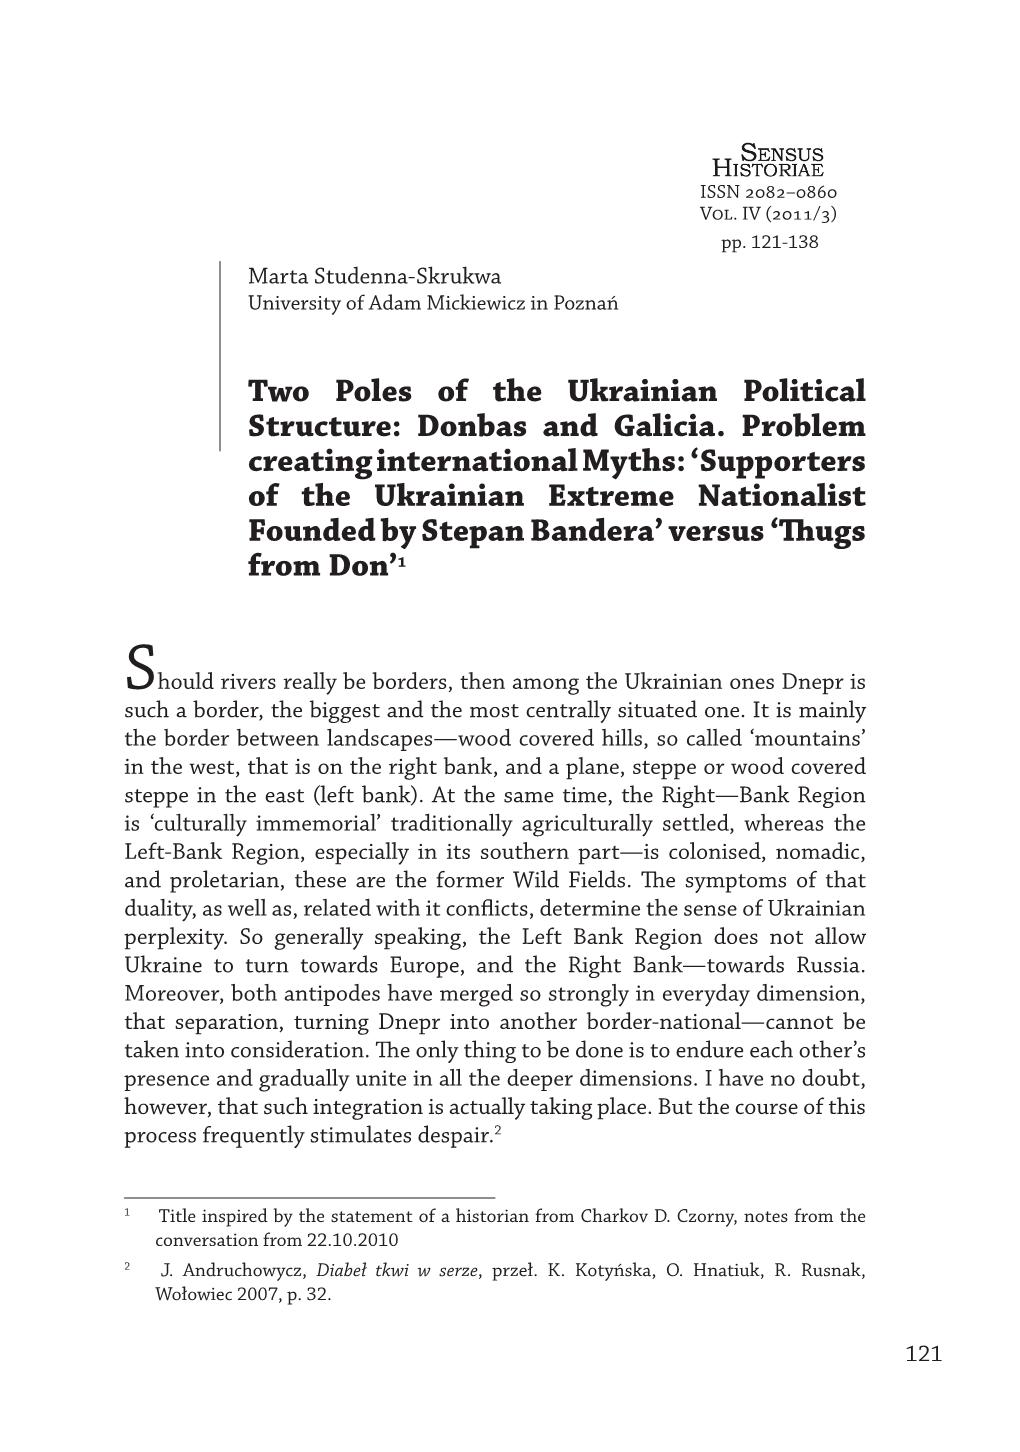 Two Poles of the Ukrainian Political Structure: Donbas and Galicia